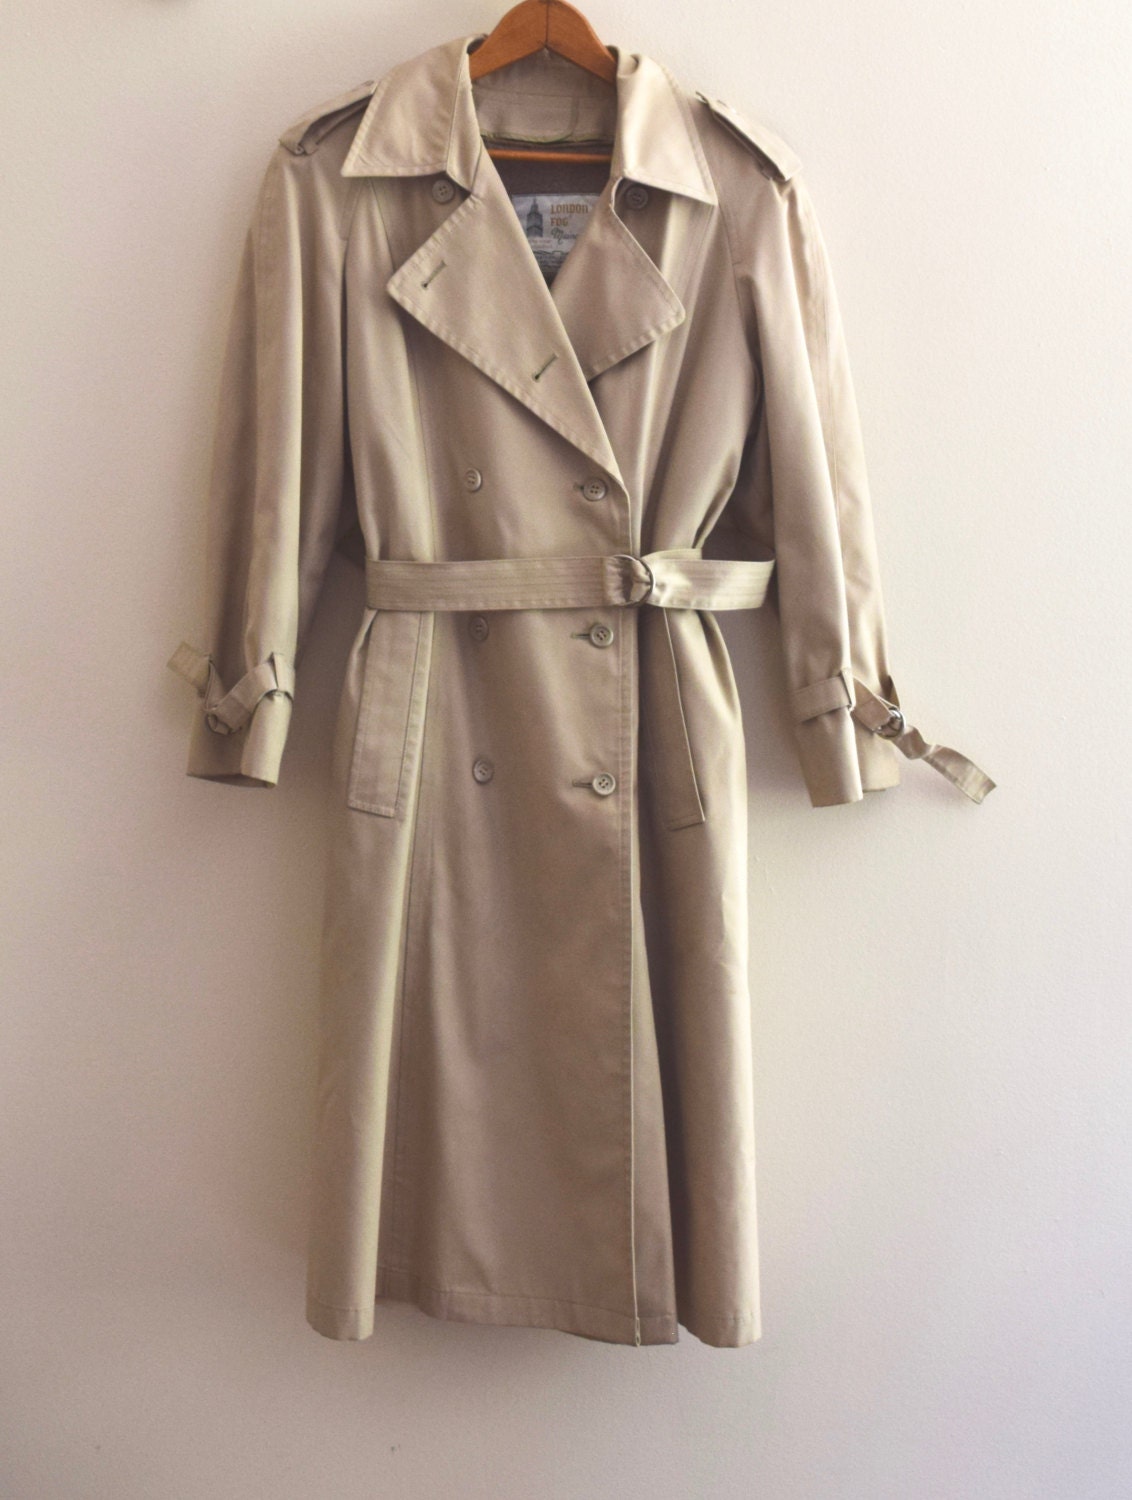 SALE 70s London Fog All Seasons Lined Trench Coat // 1970s